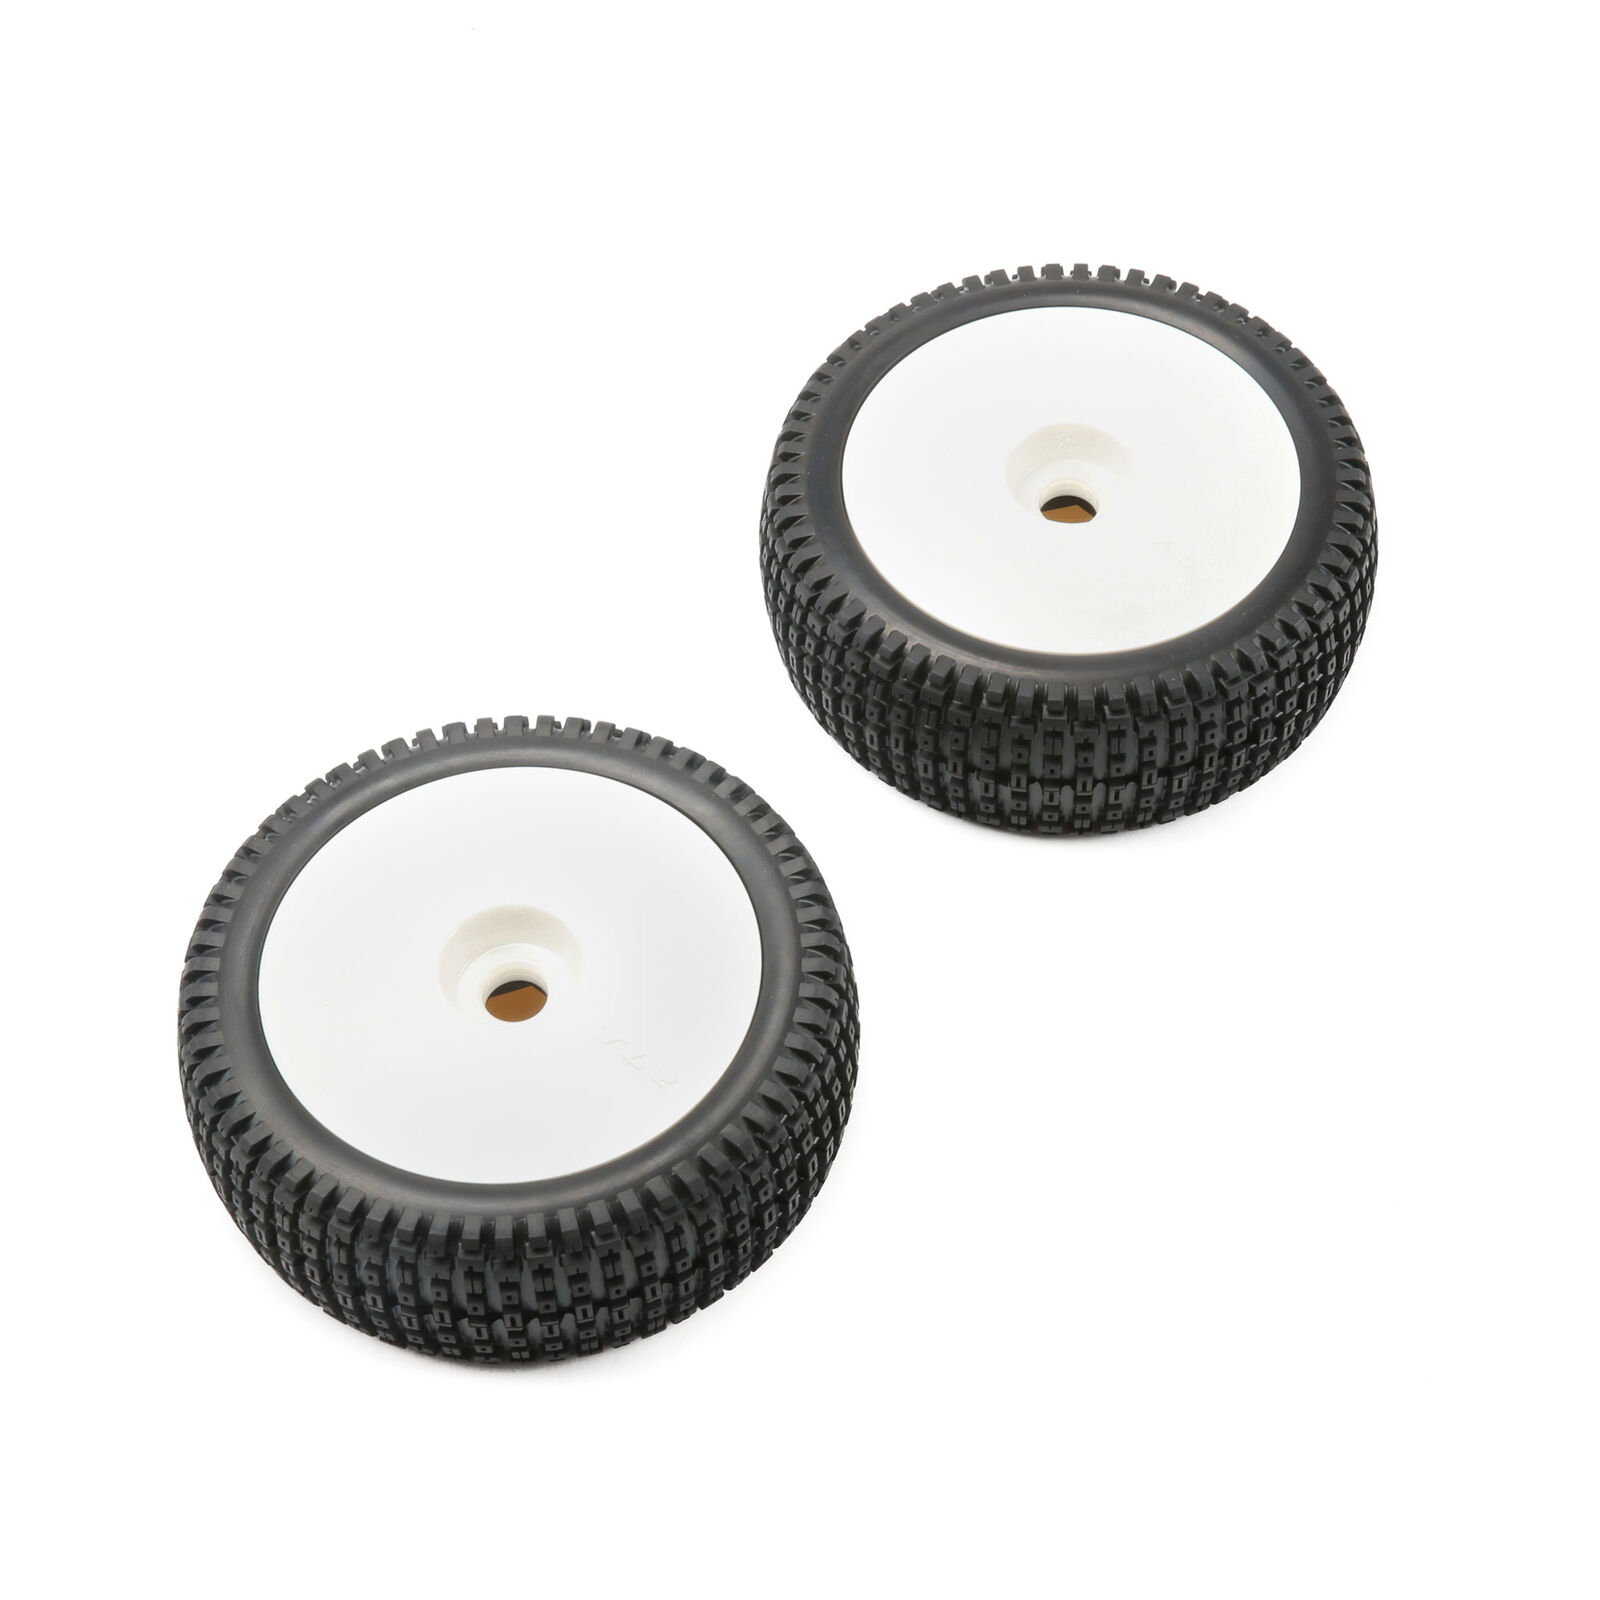 1/5 Mounted Wheel and Tire, White (2): 5IVE-B